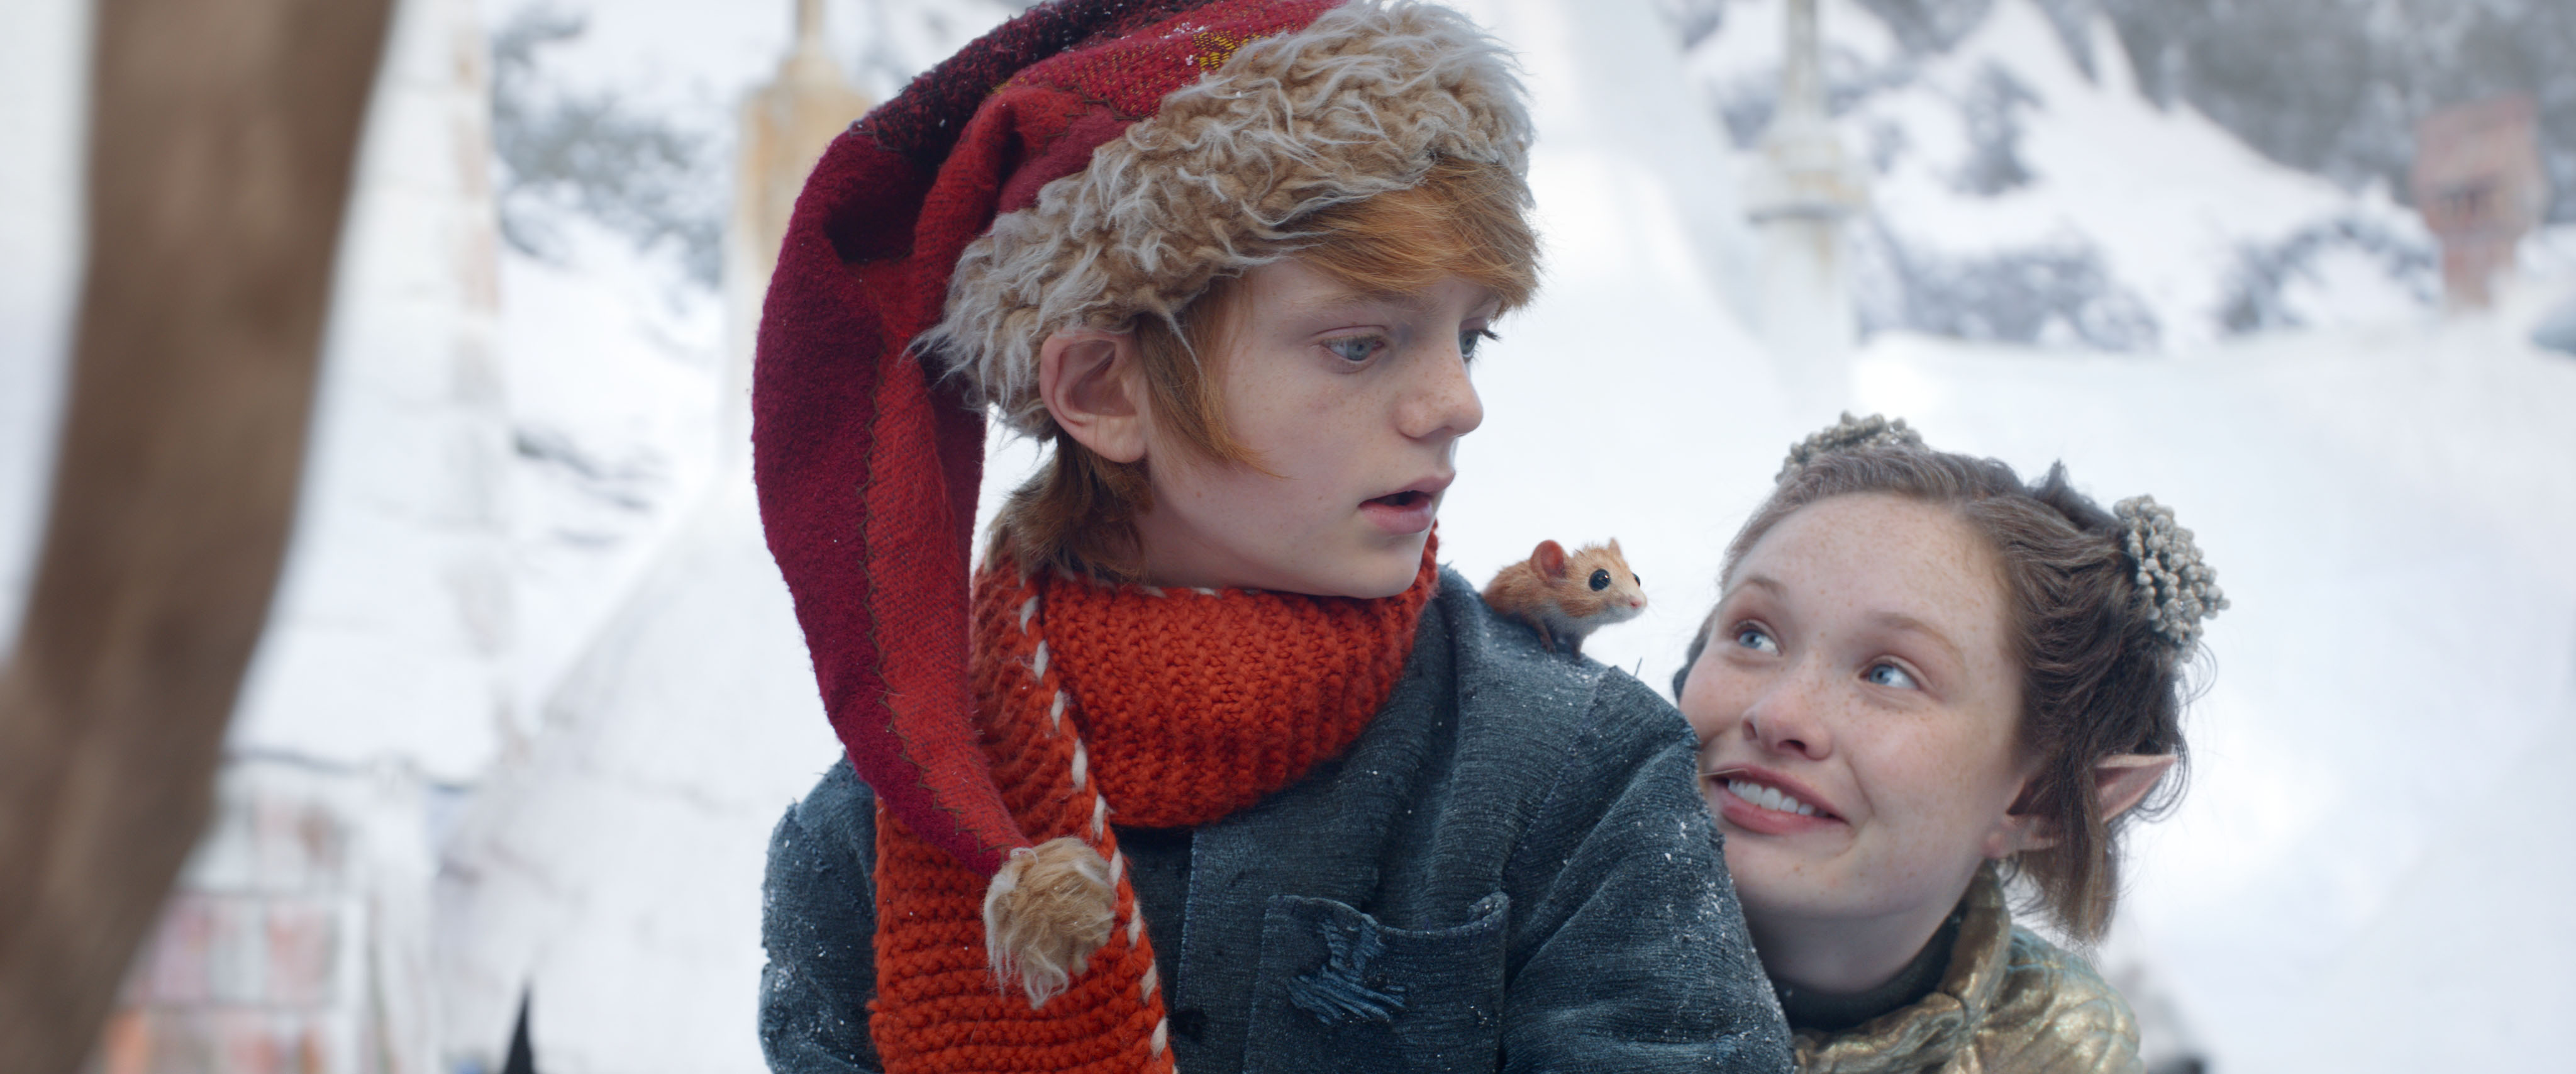 A Boy Called Christmas Cast - Every Performer and Character in the Netflix Movie